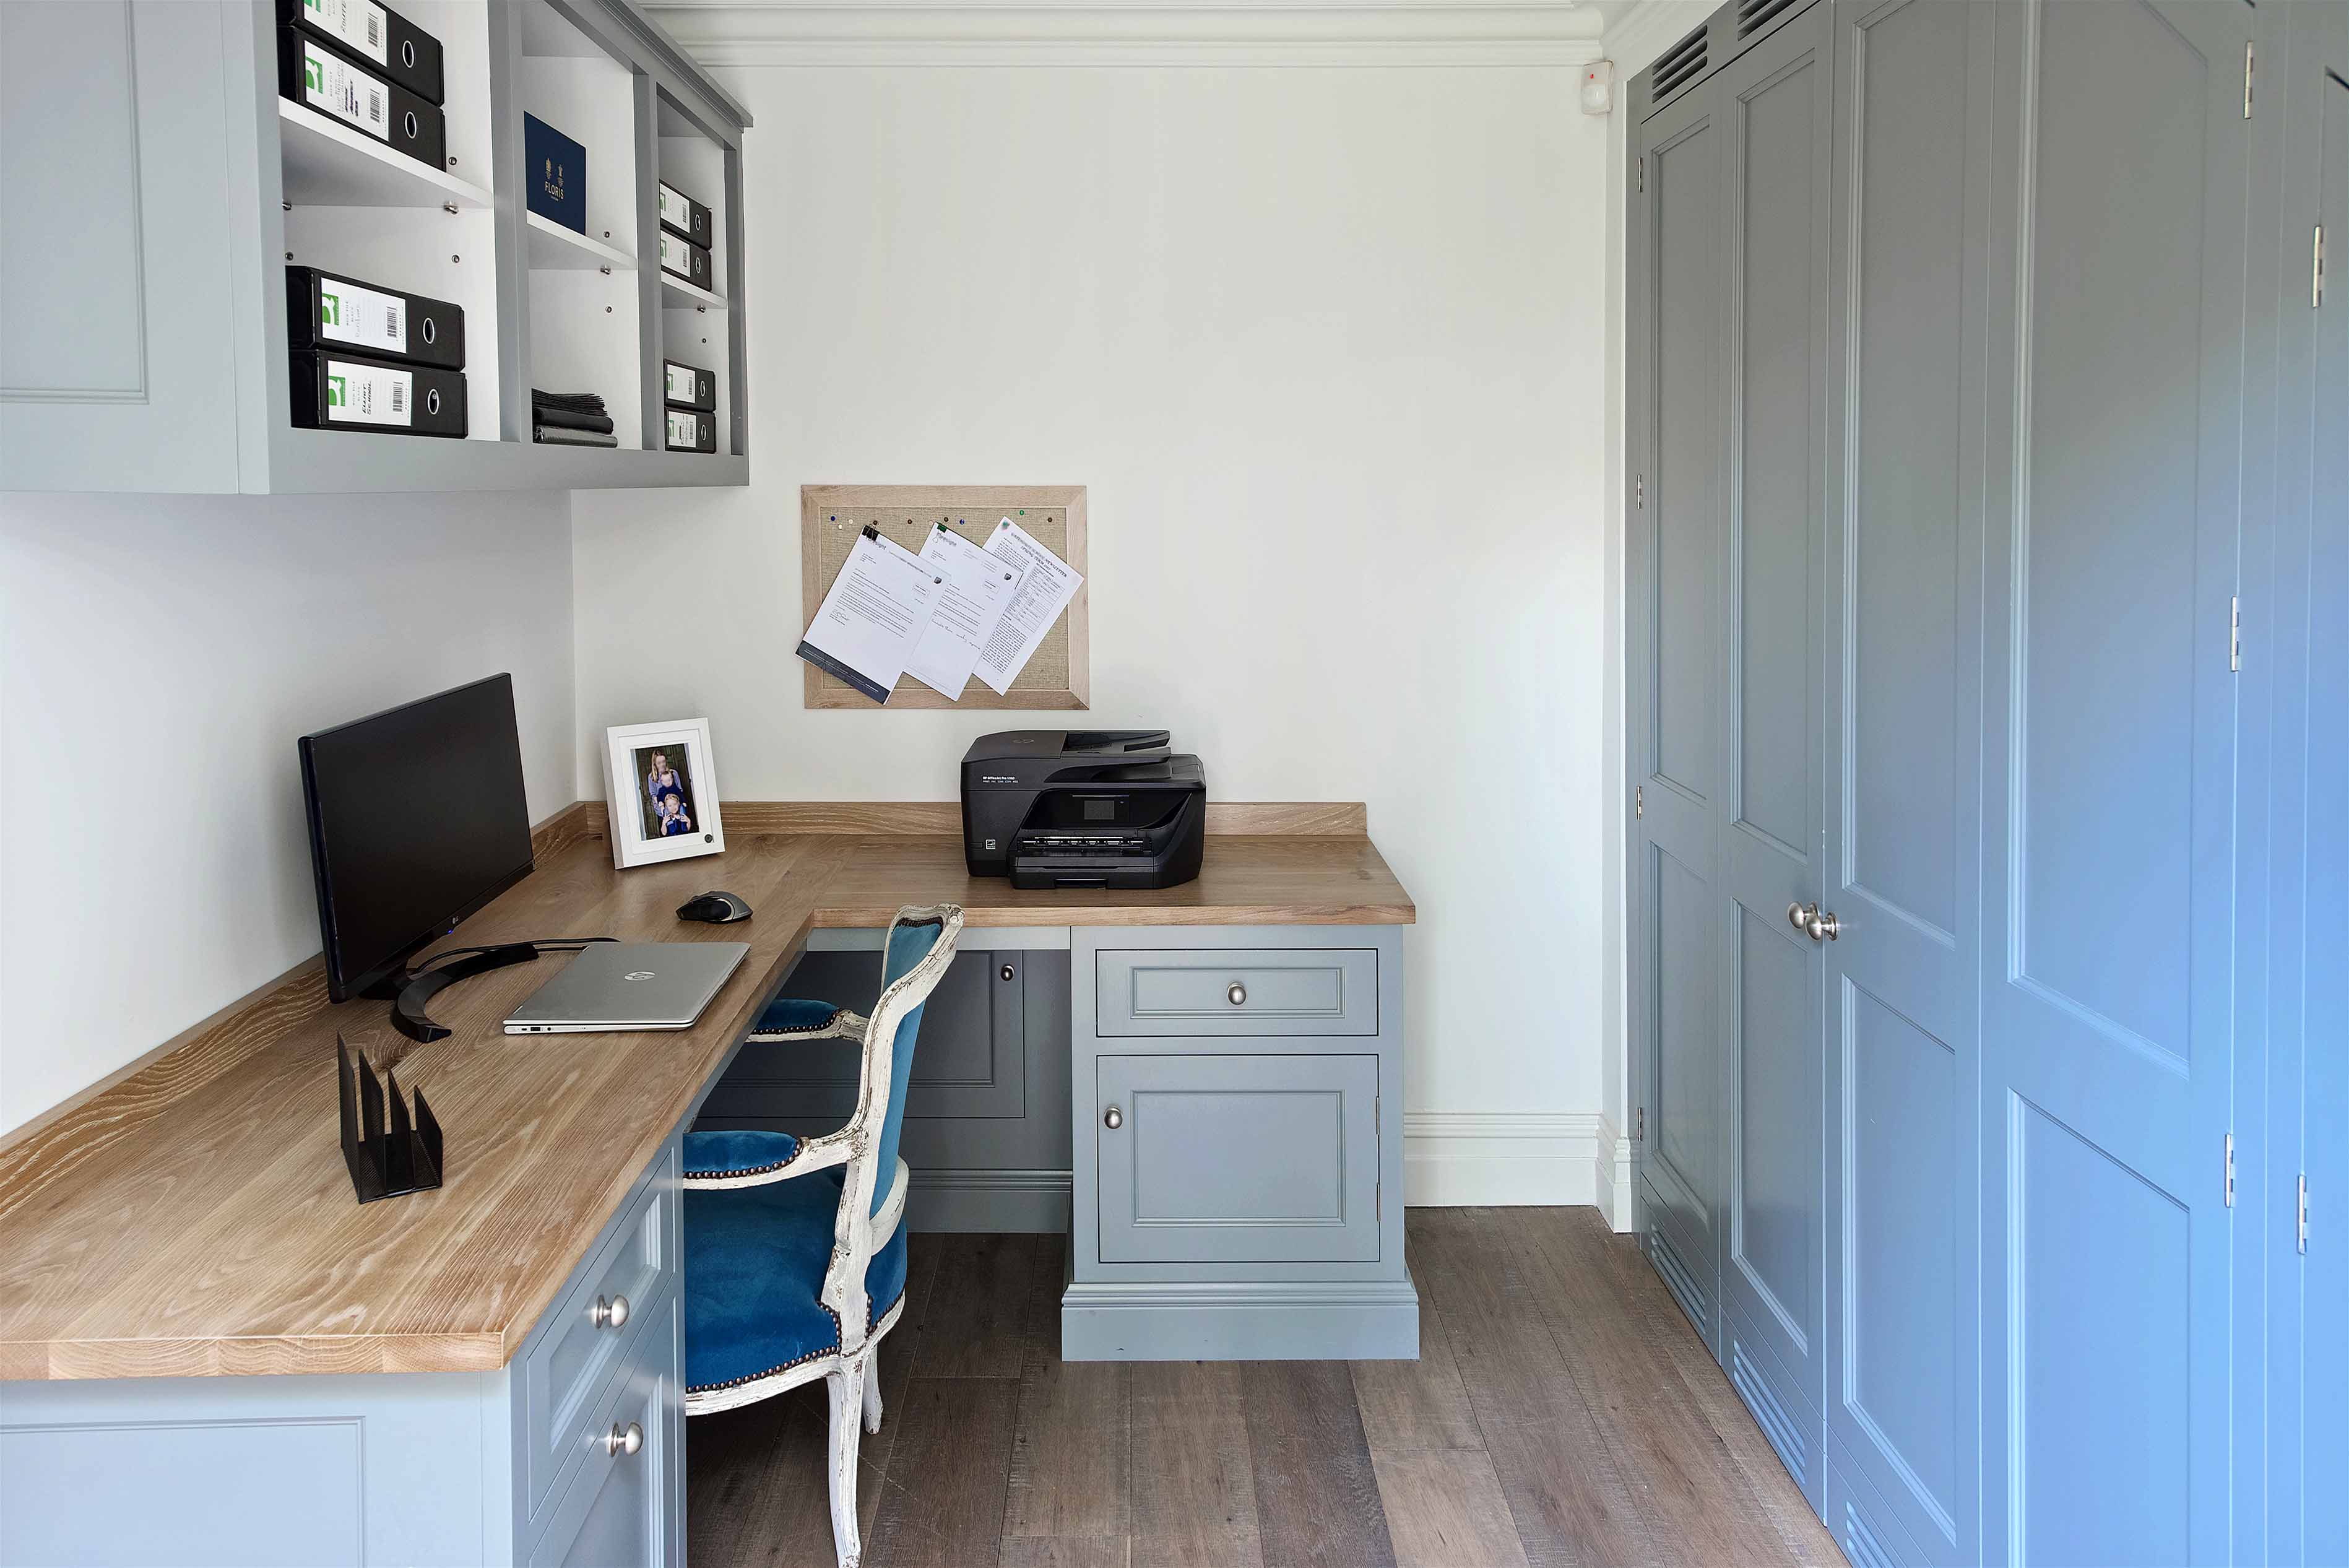 005. Bespoke library study book case desk Perrin and Rowe Armac Martin Farrow and Ball near Midhurst, West Sussex